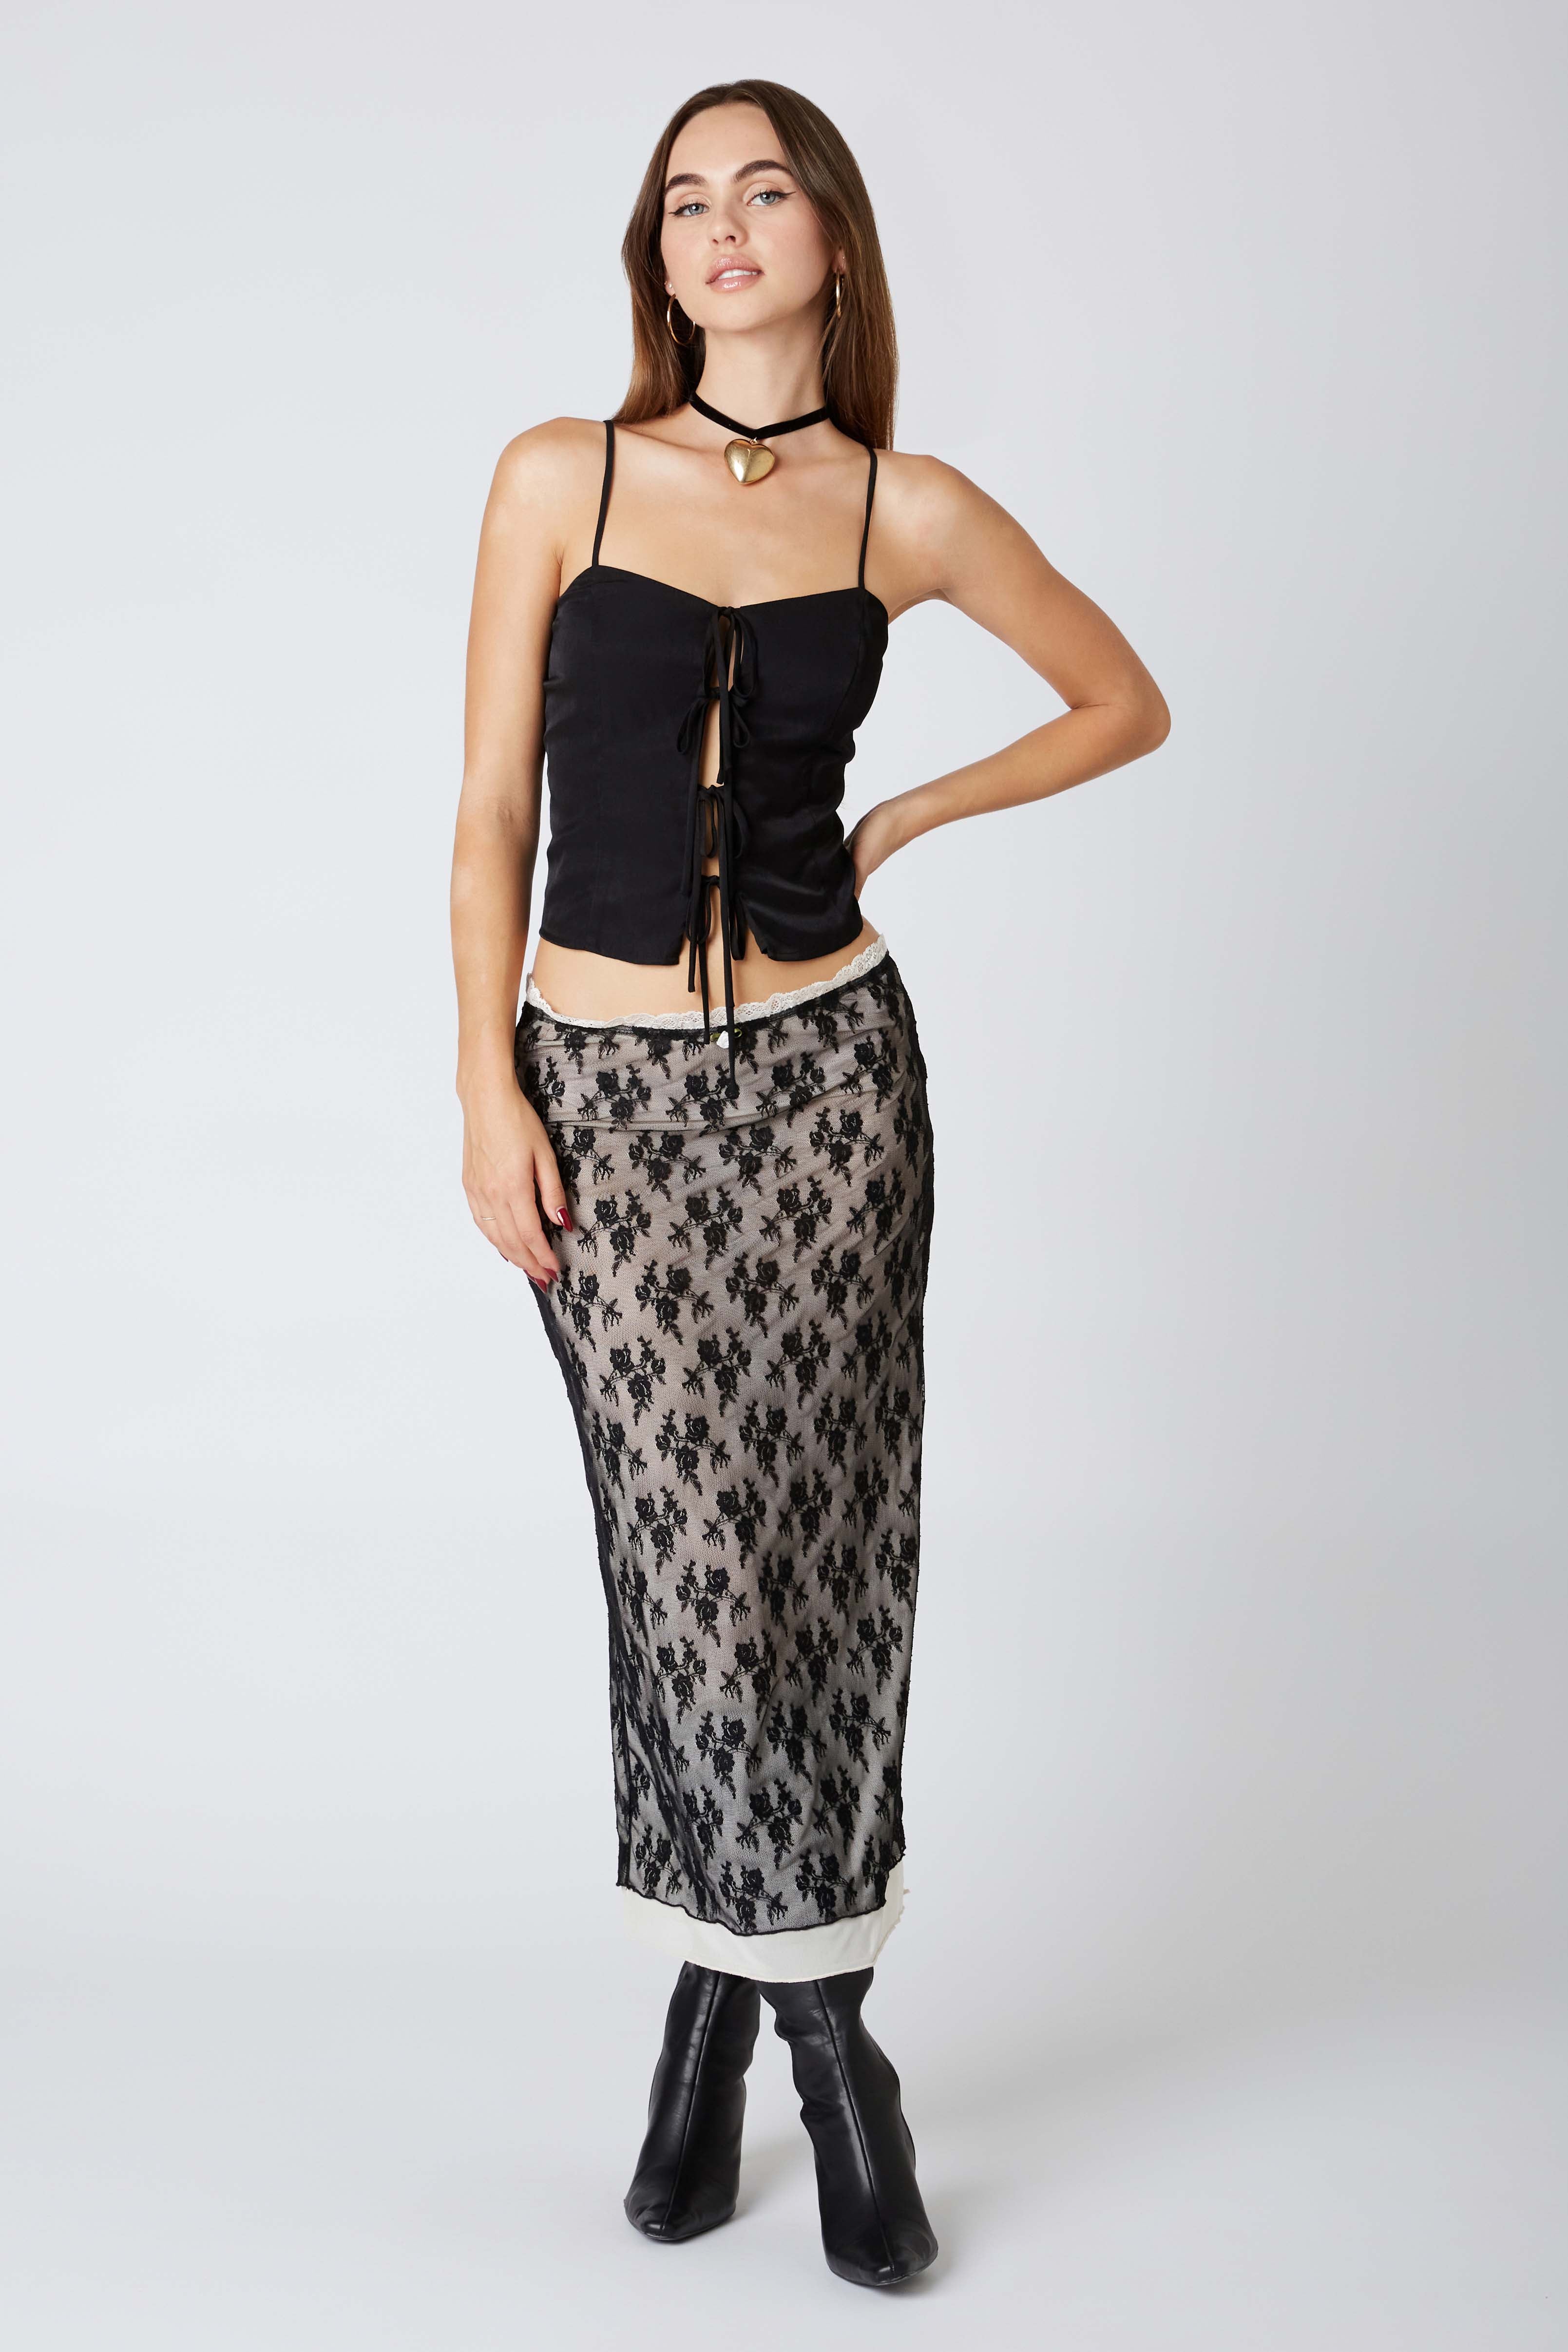 Lace Overlay Midi Skirt in Black Front View